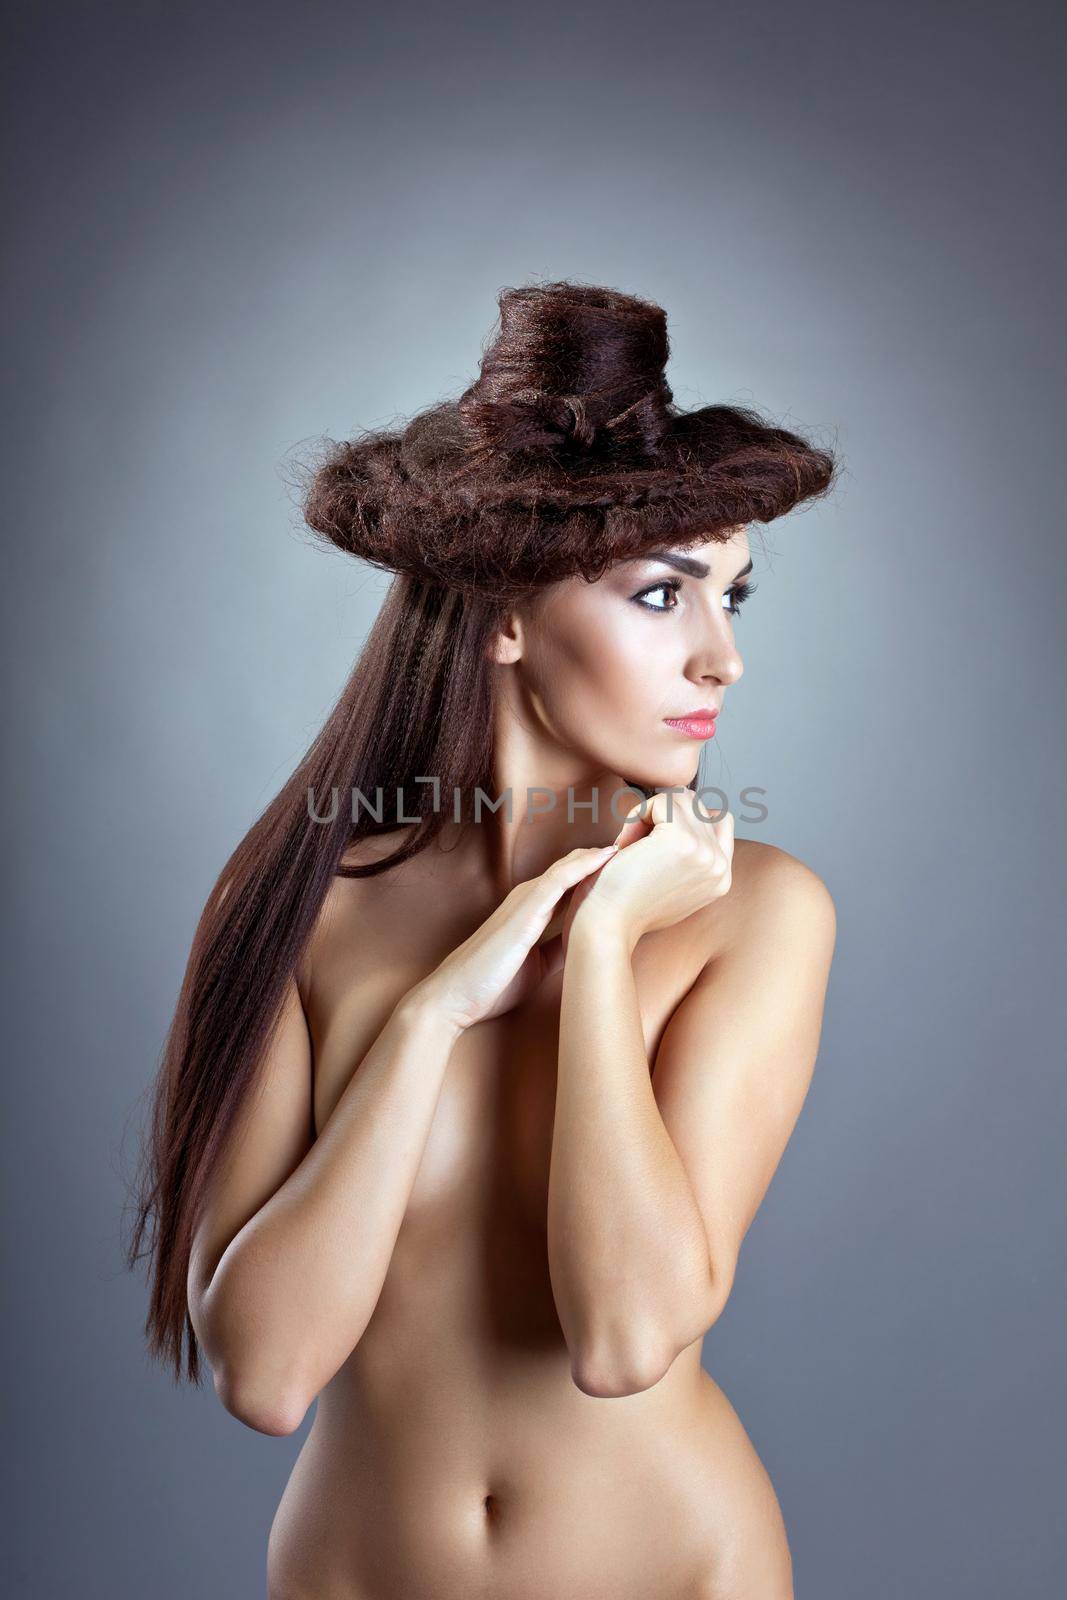 Sexy naked woman with hair style close breast look at light